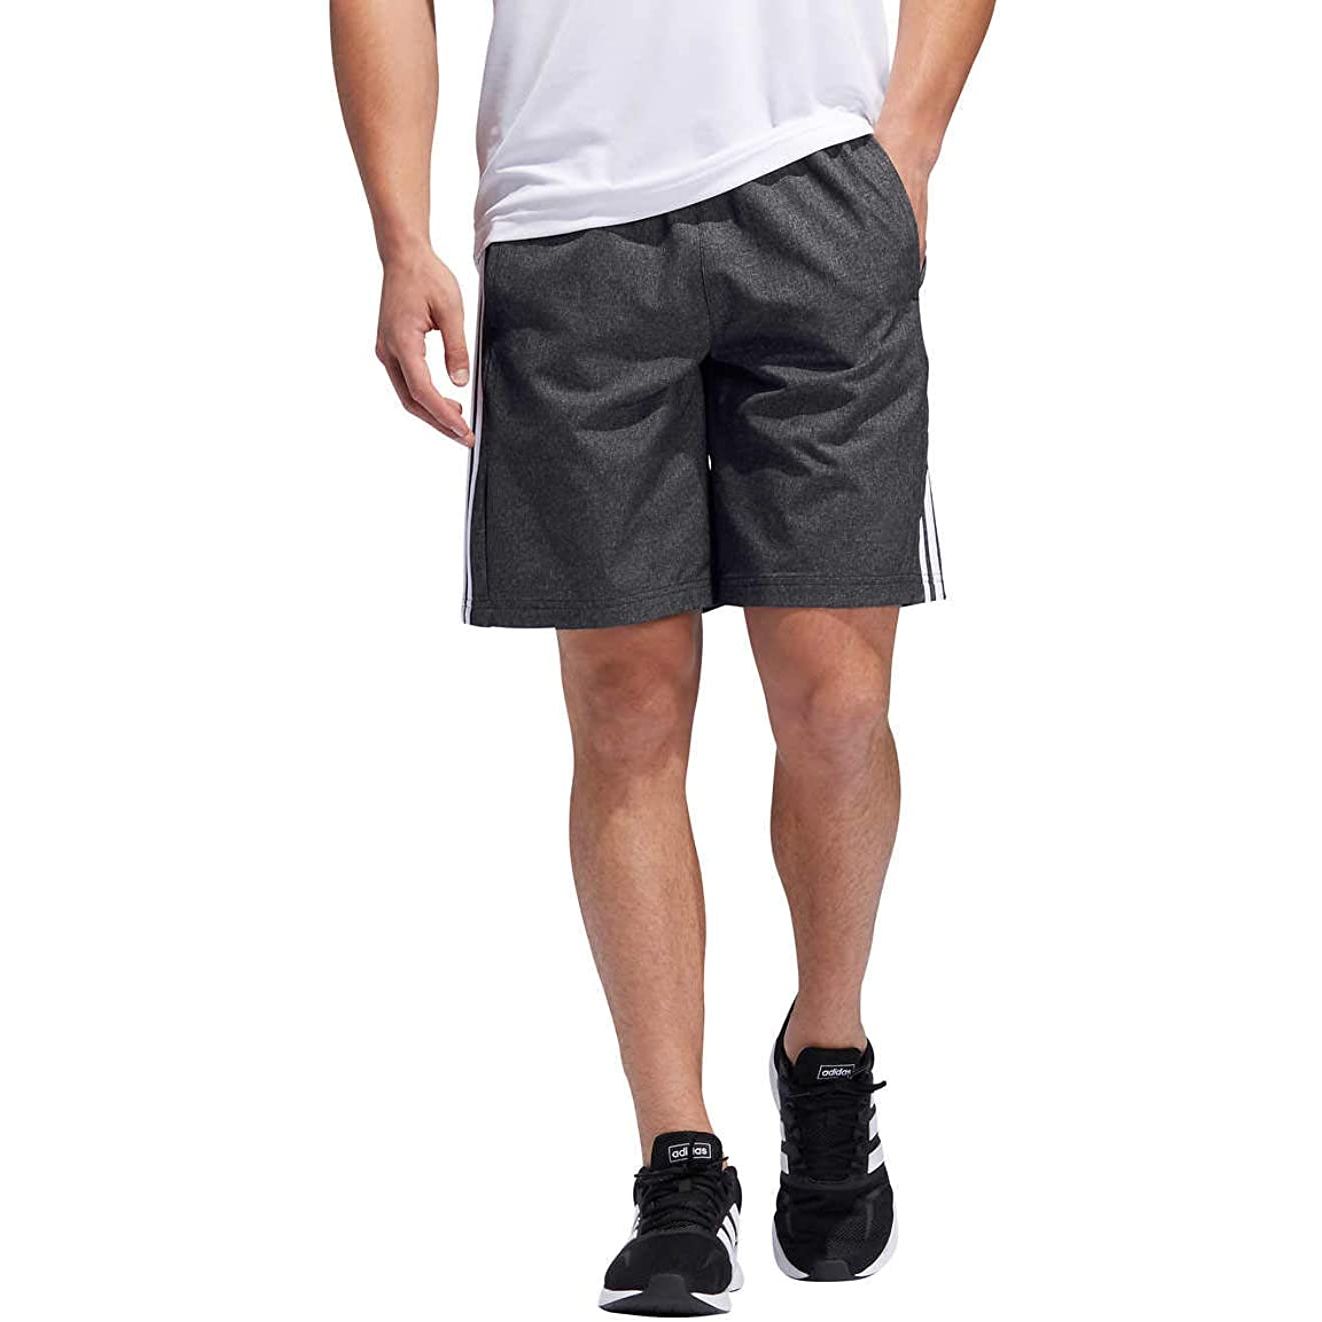 Adidas Men's Woven Active Shorts - Performance and Style for Athletes and Fitness Enthusiasts